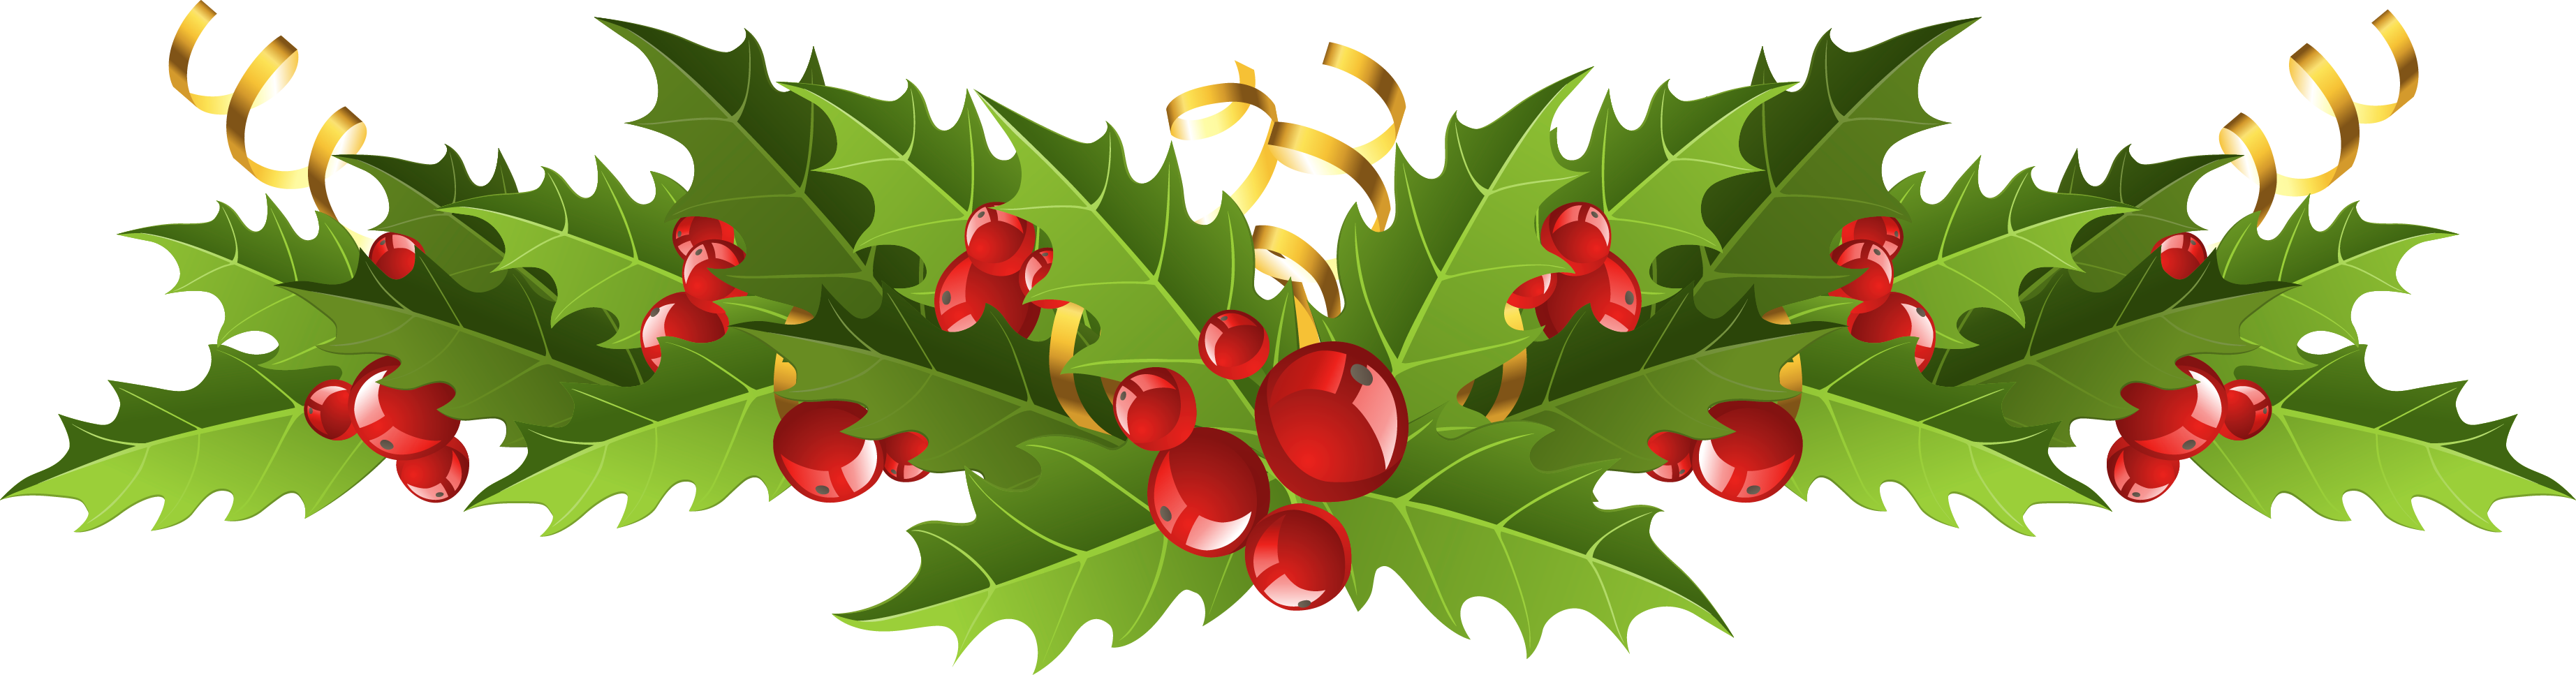 holiday clipart branch